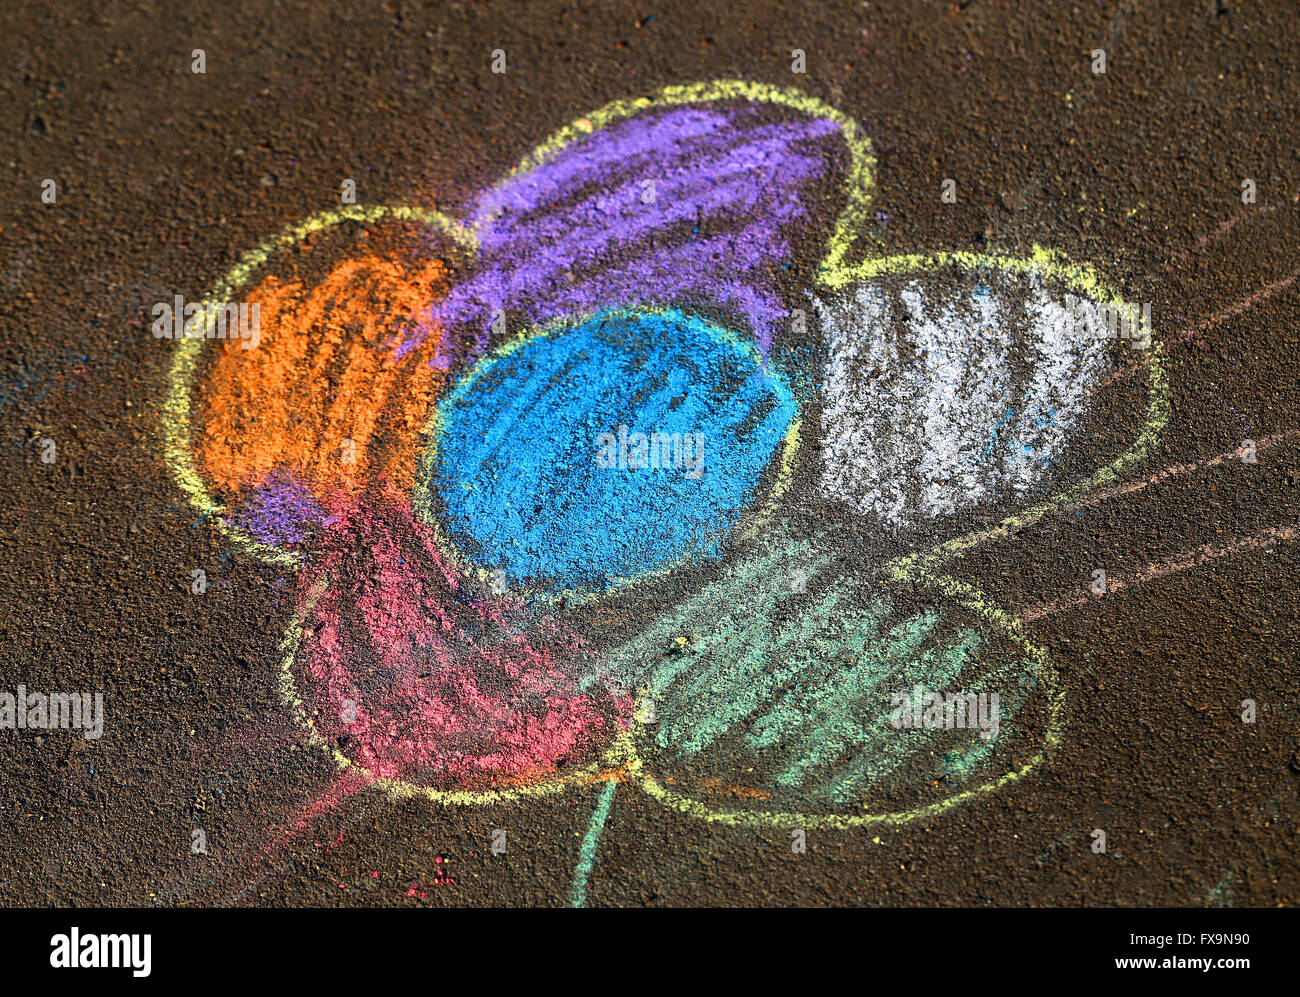 Beautiful child drawing on the road surface is photographed close up Stock Photo